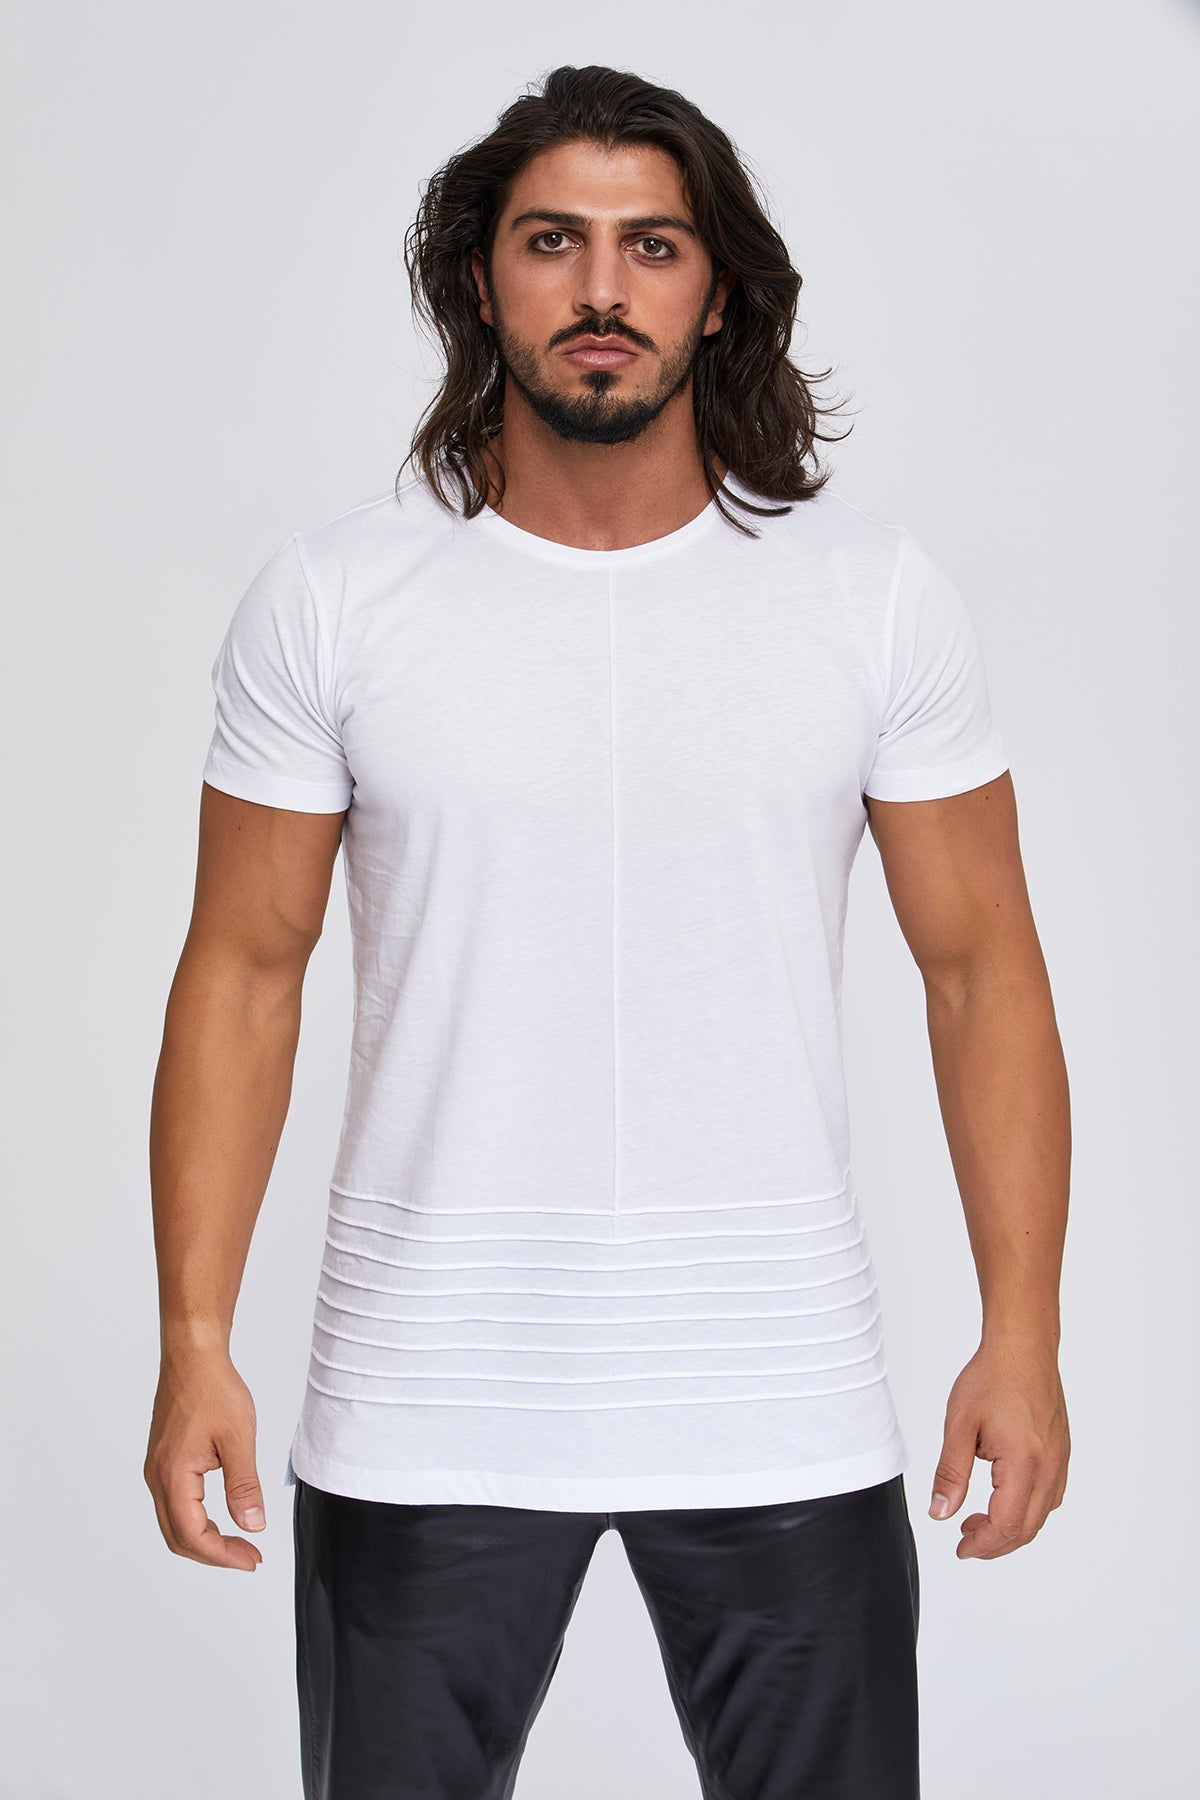 Men's short sleeve t-shirts 100 % great quality Turkish Pima cotton preshrunk. Designer. Trendy. Muscle loose fit. Sports. Work Out. T-shirt.